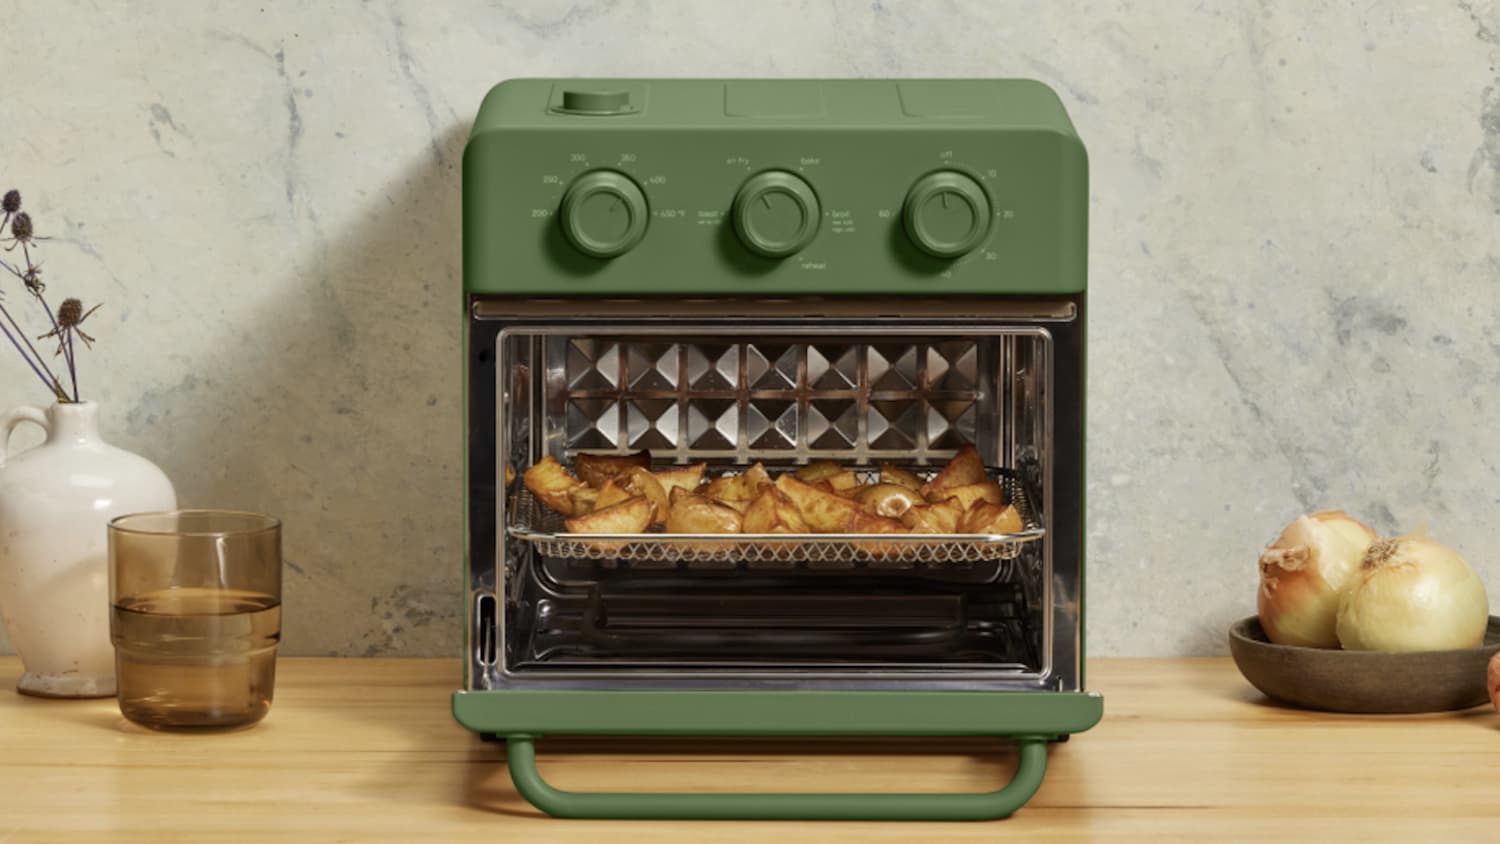 Wonder Oven by Our Place 6-in-1 air fryer toaster oven with steam - No  Trays